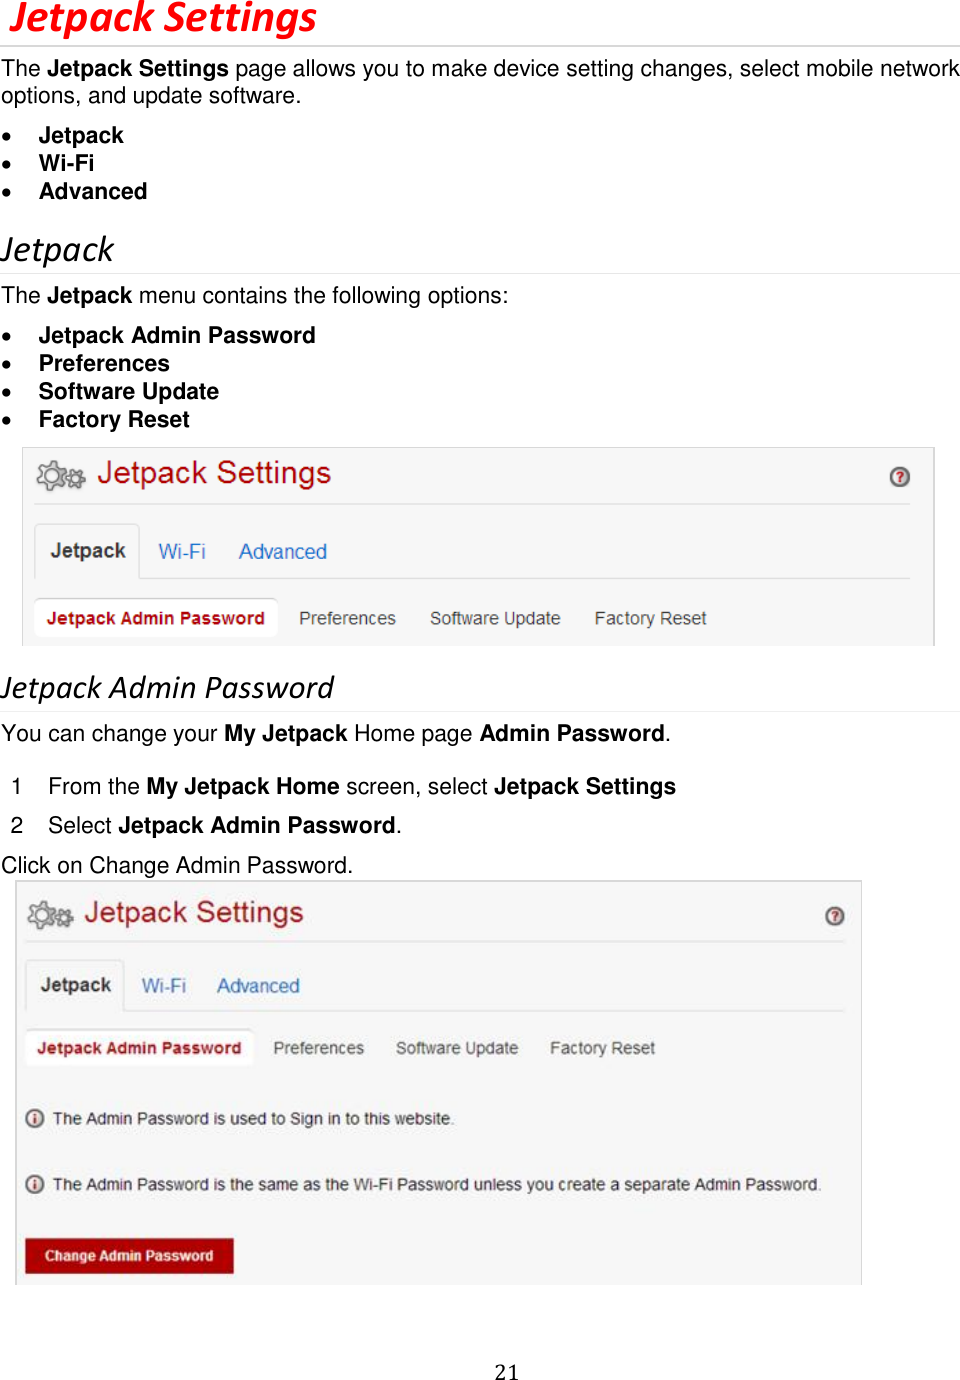   21   Jetpack Settings The Jetpack Settings page allows you to make device setting changes, select mobile network options, and update software.  Jetpack  Wi-Fi  Advanced Jetpack The Jetpack menu contains the following options:  Jetpack Admin Password   Preferences  Software Update  Factory Reset      Jetpack Admin Password You can change your My Jetpack Home page Admin Password.   1  From the My Jetpack Home screen, select Jetpack Settings 2  Select Jetpack Admin Password. Click on Change Admin Password.           